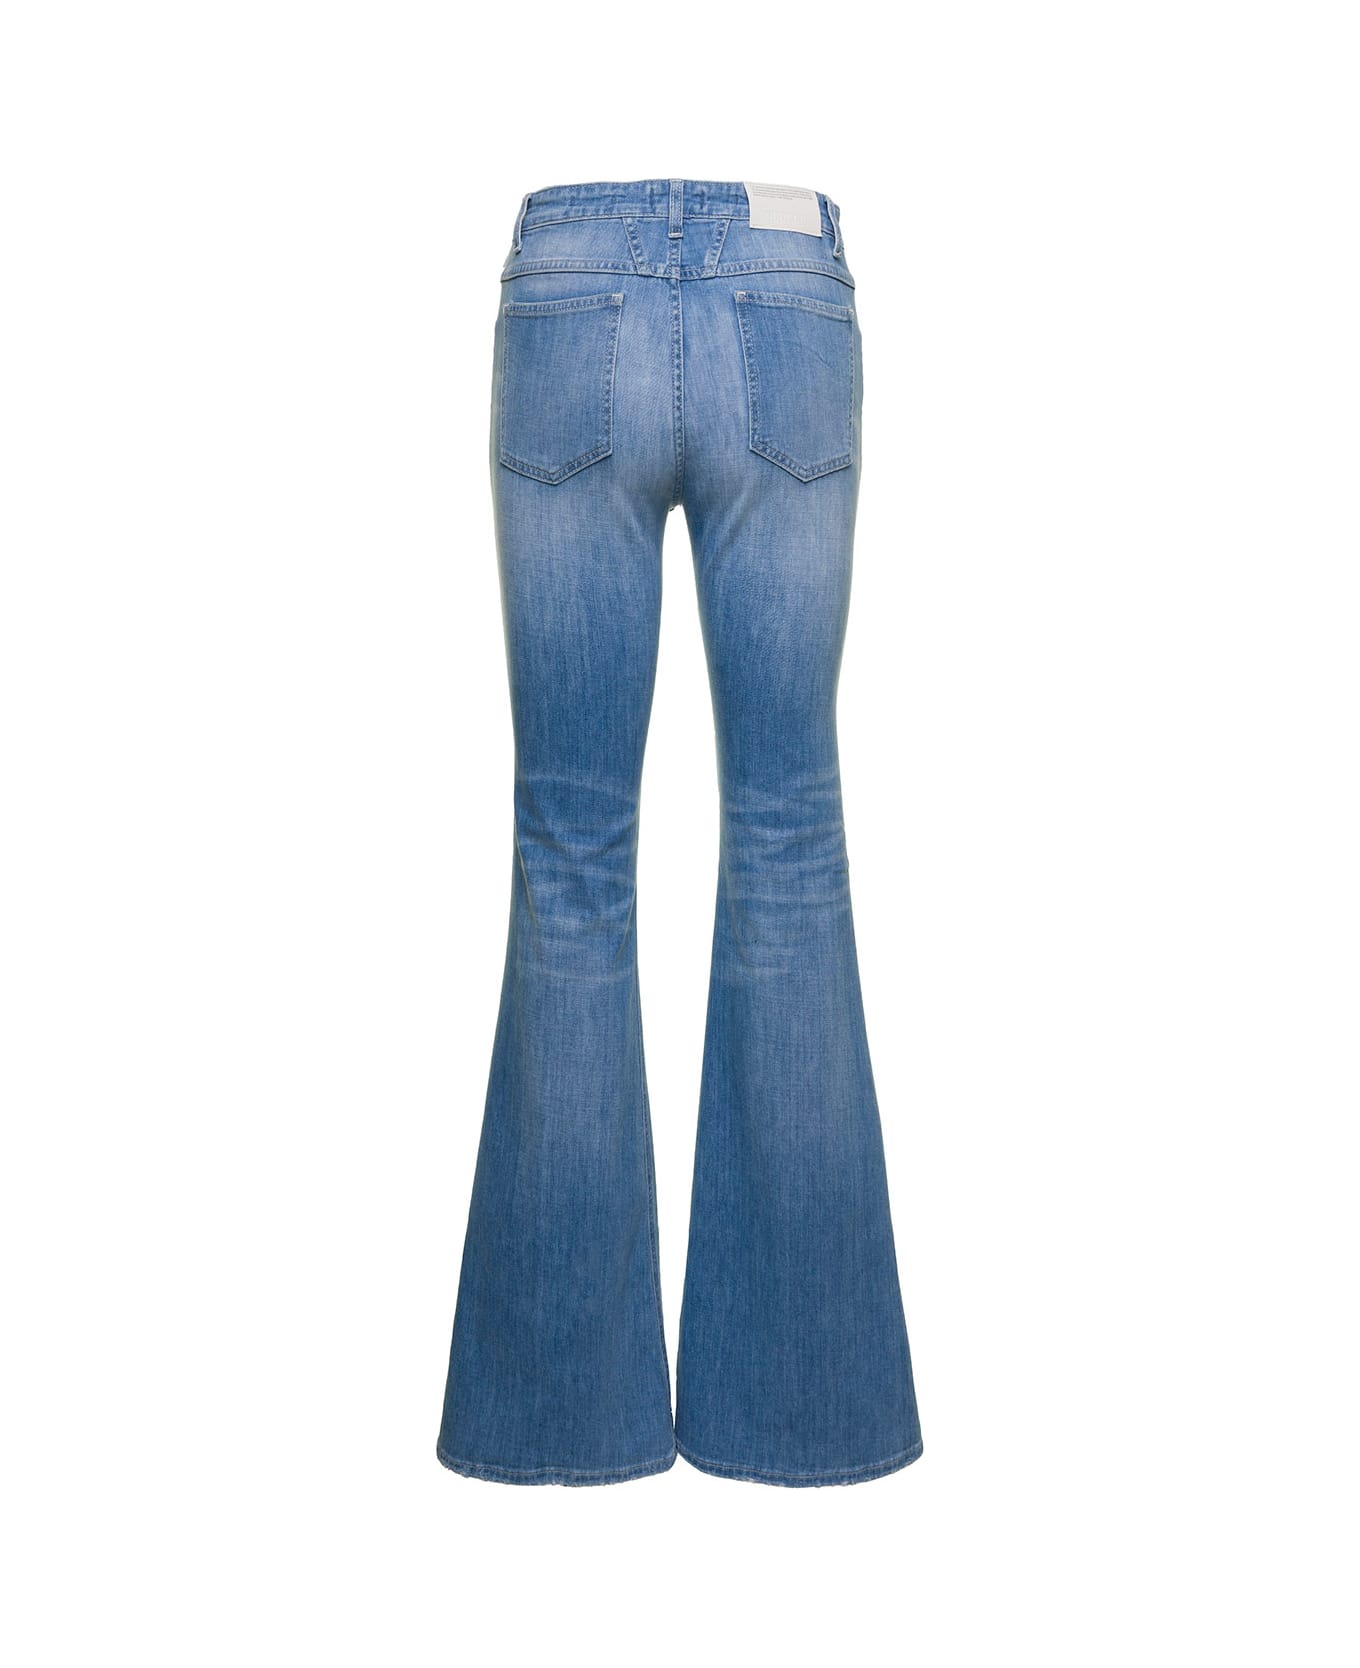 Closed Light Blue Flared Jeans With Tricolor Embroidery In Cotton Denim Woman - Blu